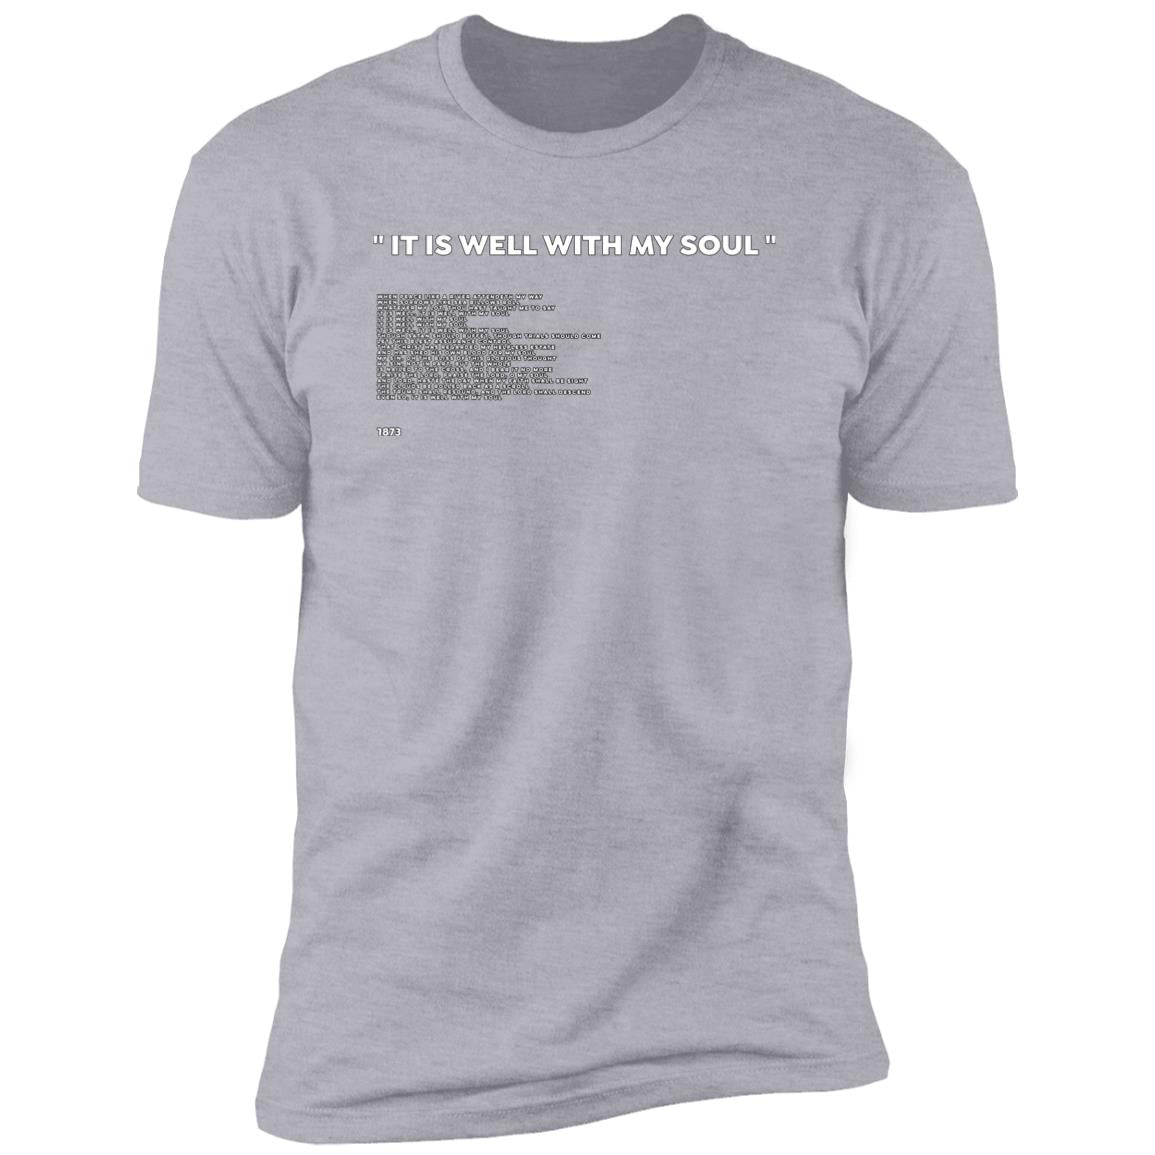 It is Well with my Soul (Unisex Tee)